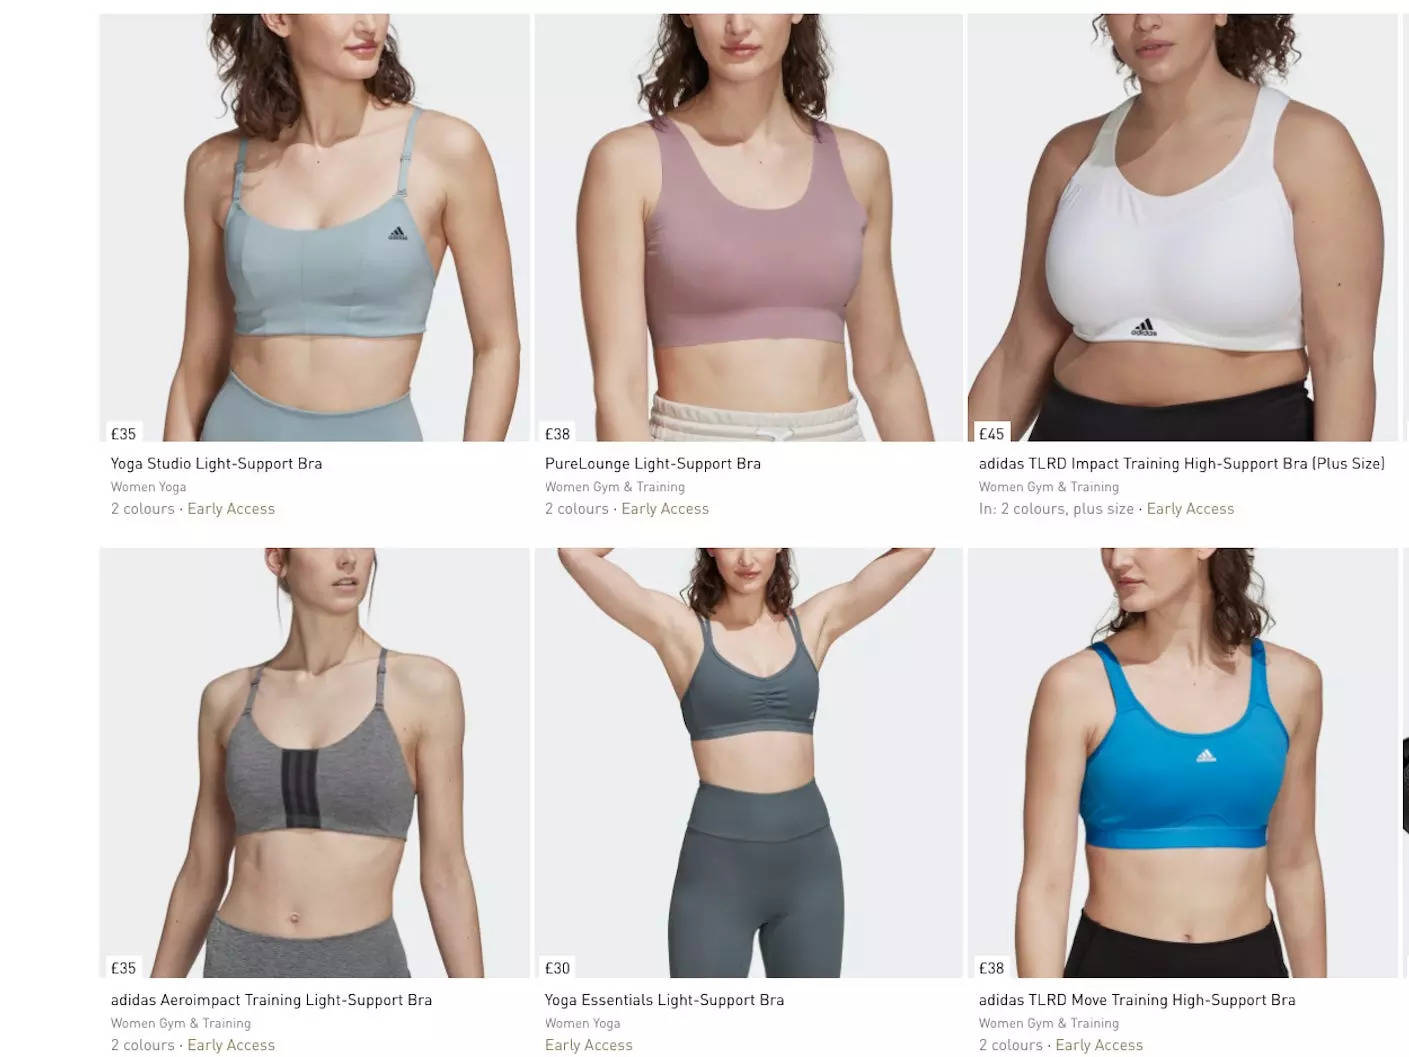 Adidas' bare breast campaign to promote its sports bras sparks